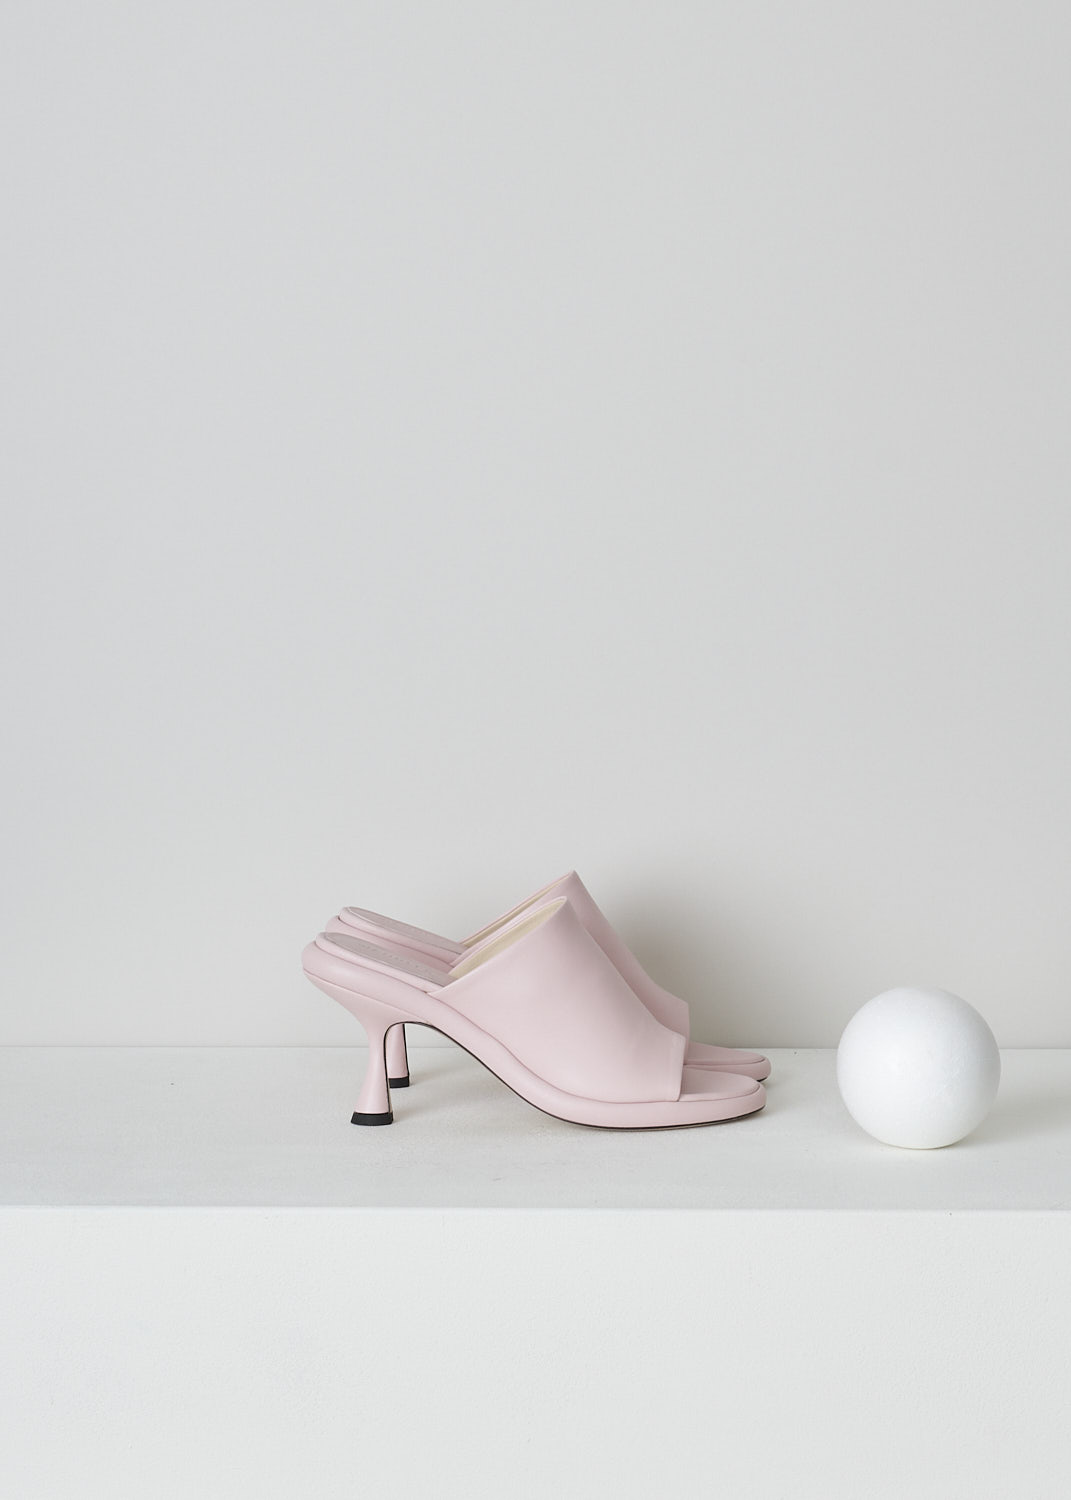 WANDLER, JUNE PLATFORM PUMPS IN SOFT PINK, 23202_871201_1862, Pink, Side, These soft pink heeled slip-on mules have a broad strap across the vamp, a rounded open-toe and a platform sole. The slip-on mules have a mid-height spool heel.

